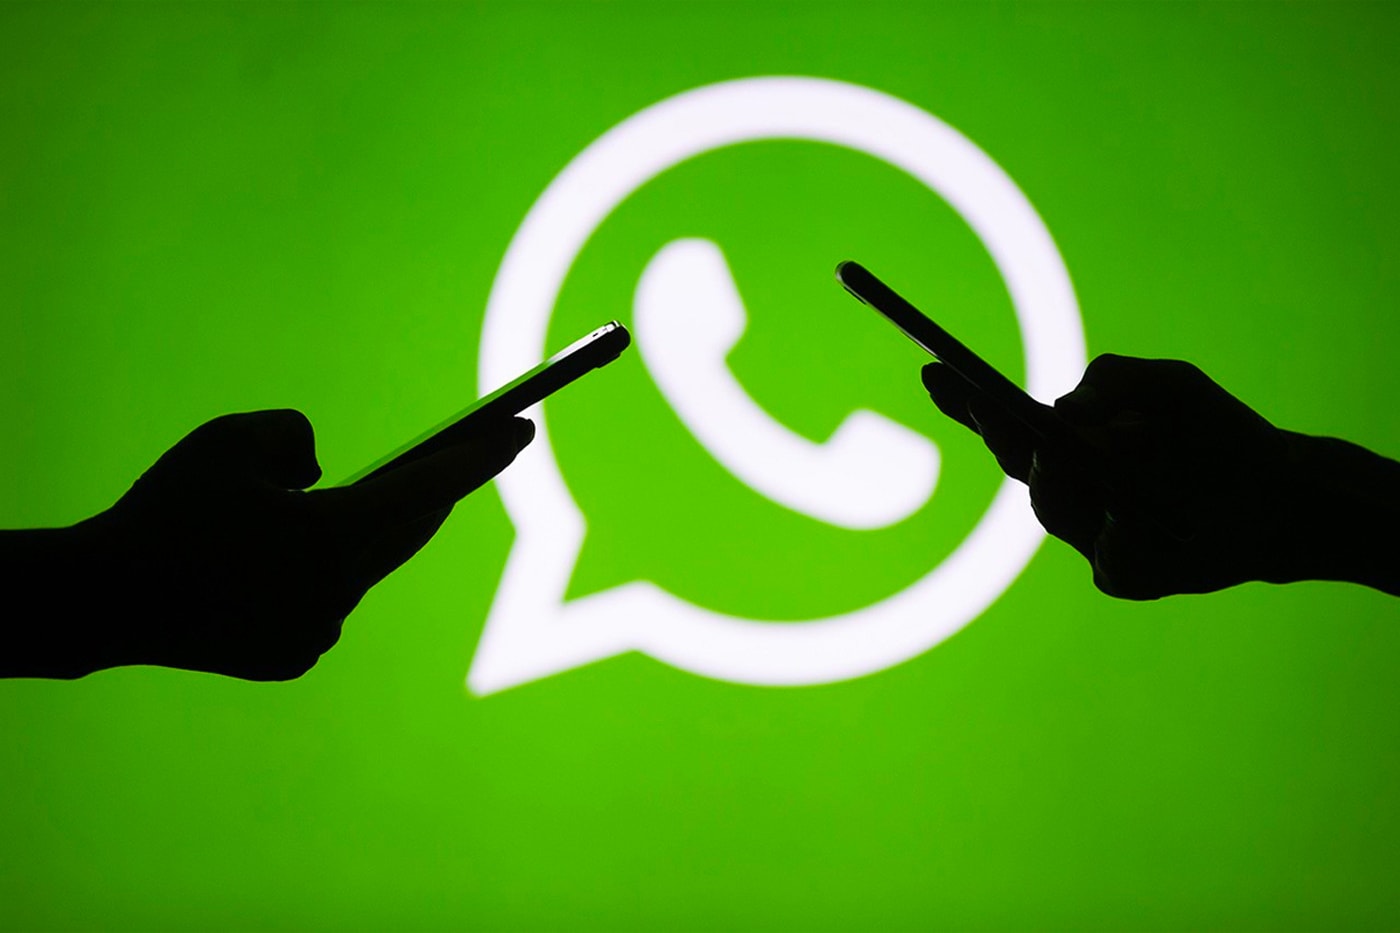 WhatsApp New Privacy Policy Lose Functionality Lose Messaging System May 15 Facebook Messaging App TechCrunch WhatsApp details what will happen to users who don’t agree to privacy changes